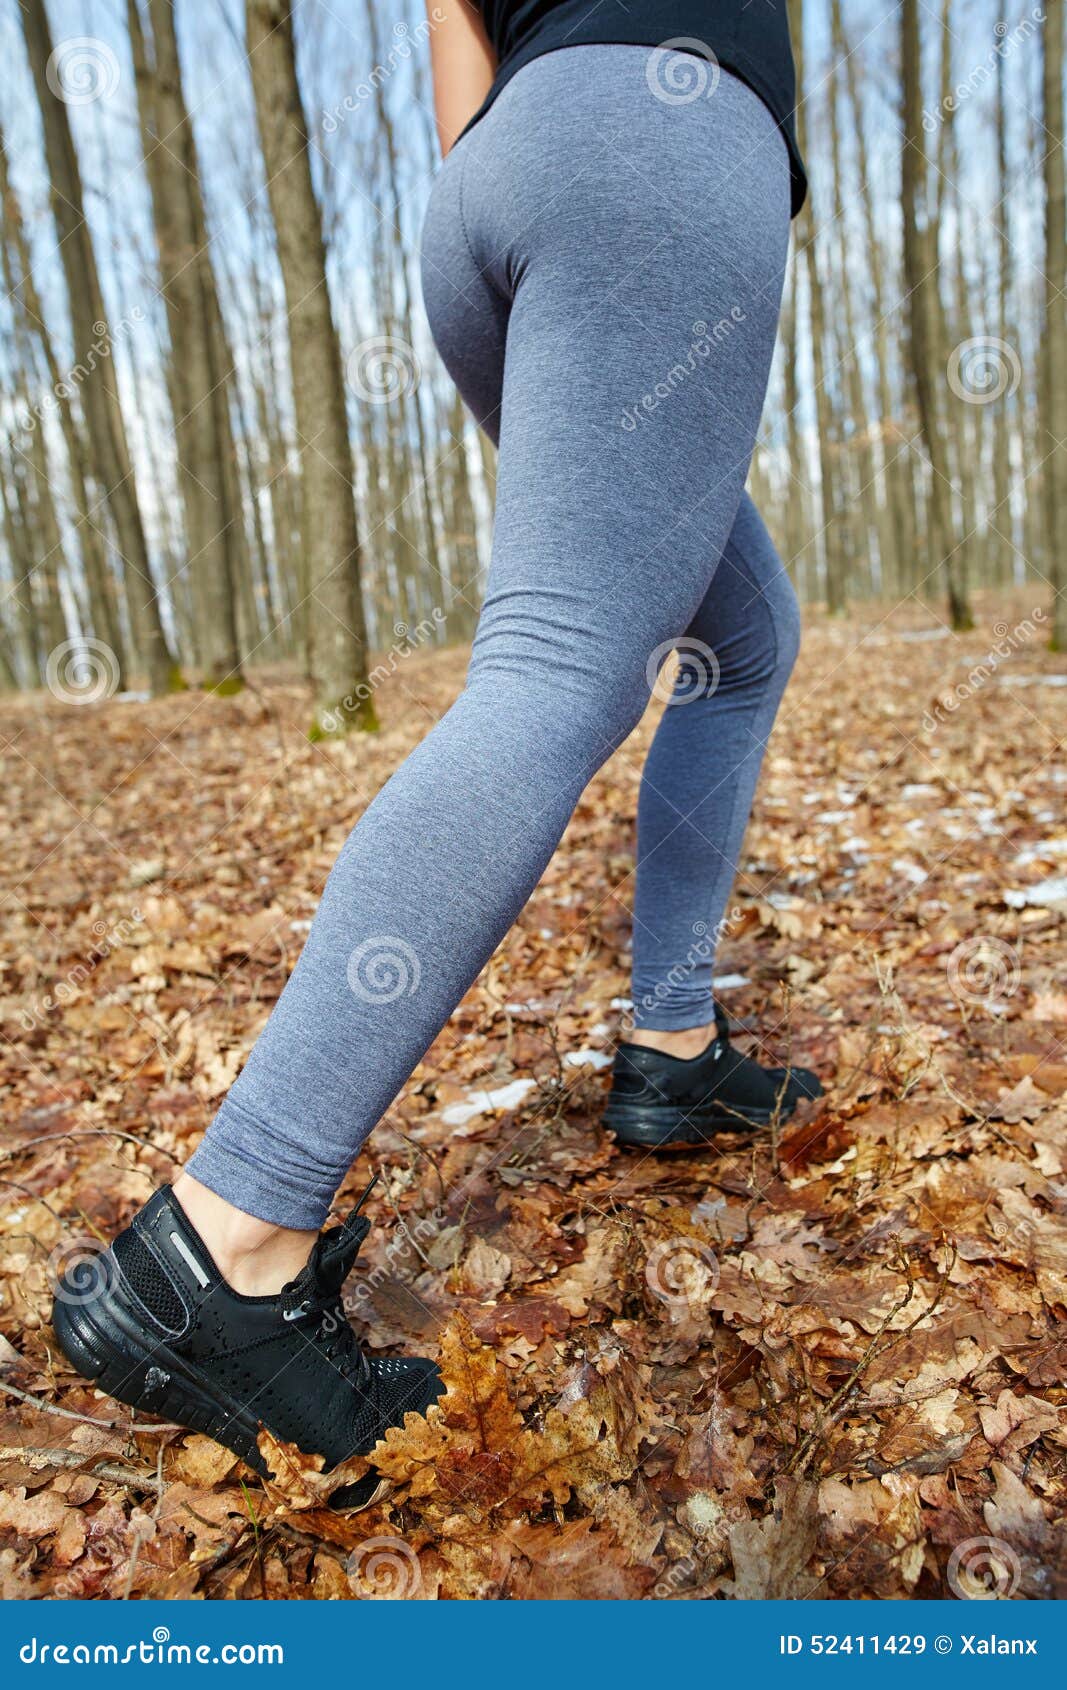 Jogger s feet closeup stock image. Image of exercise 52411429